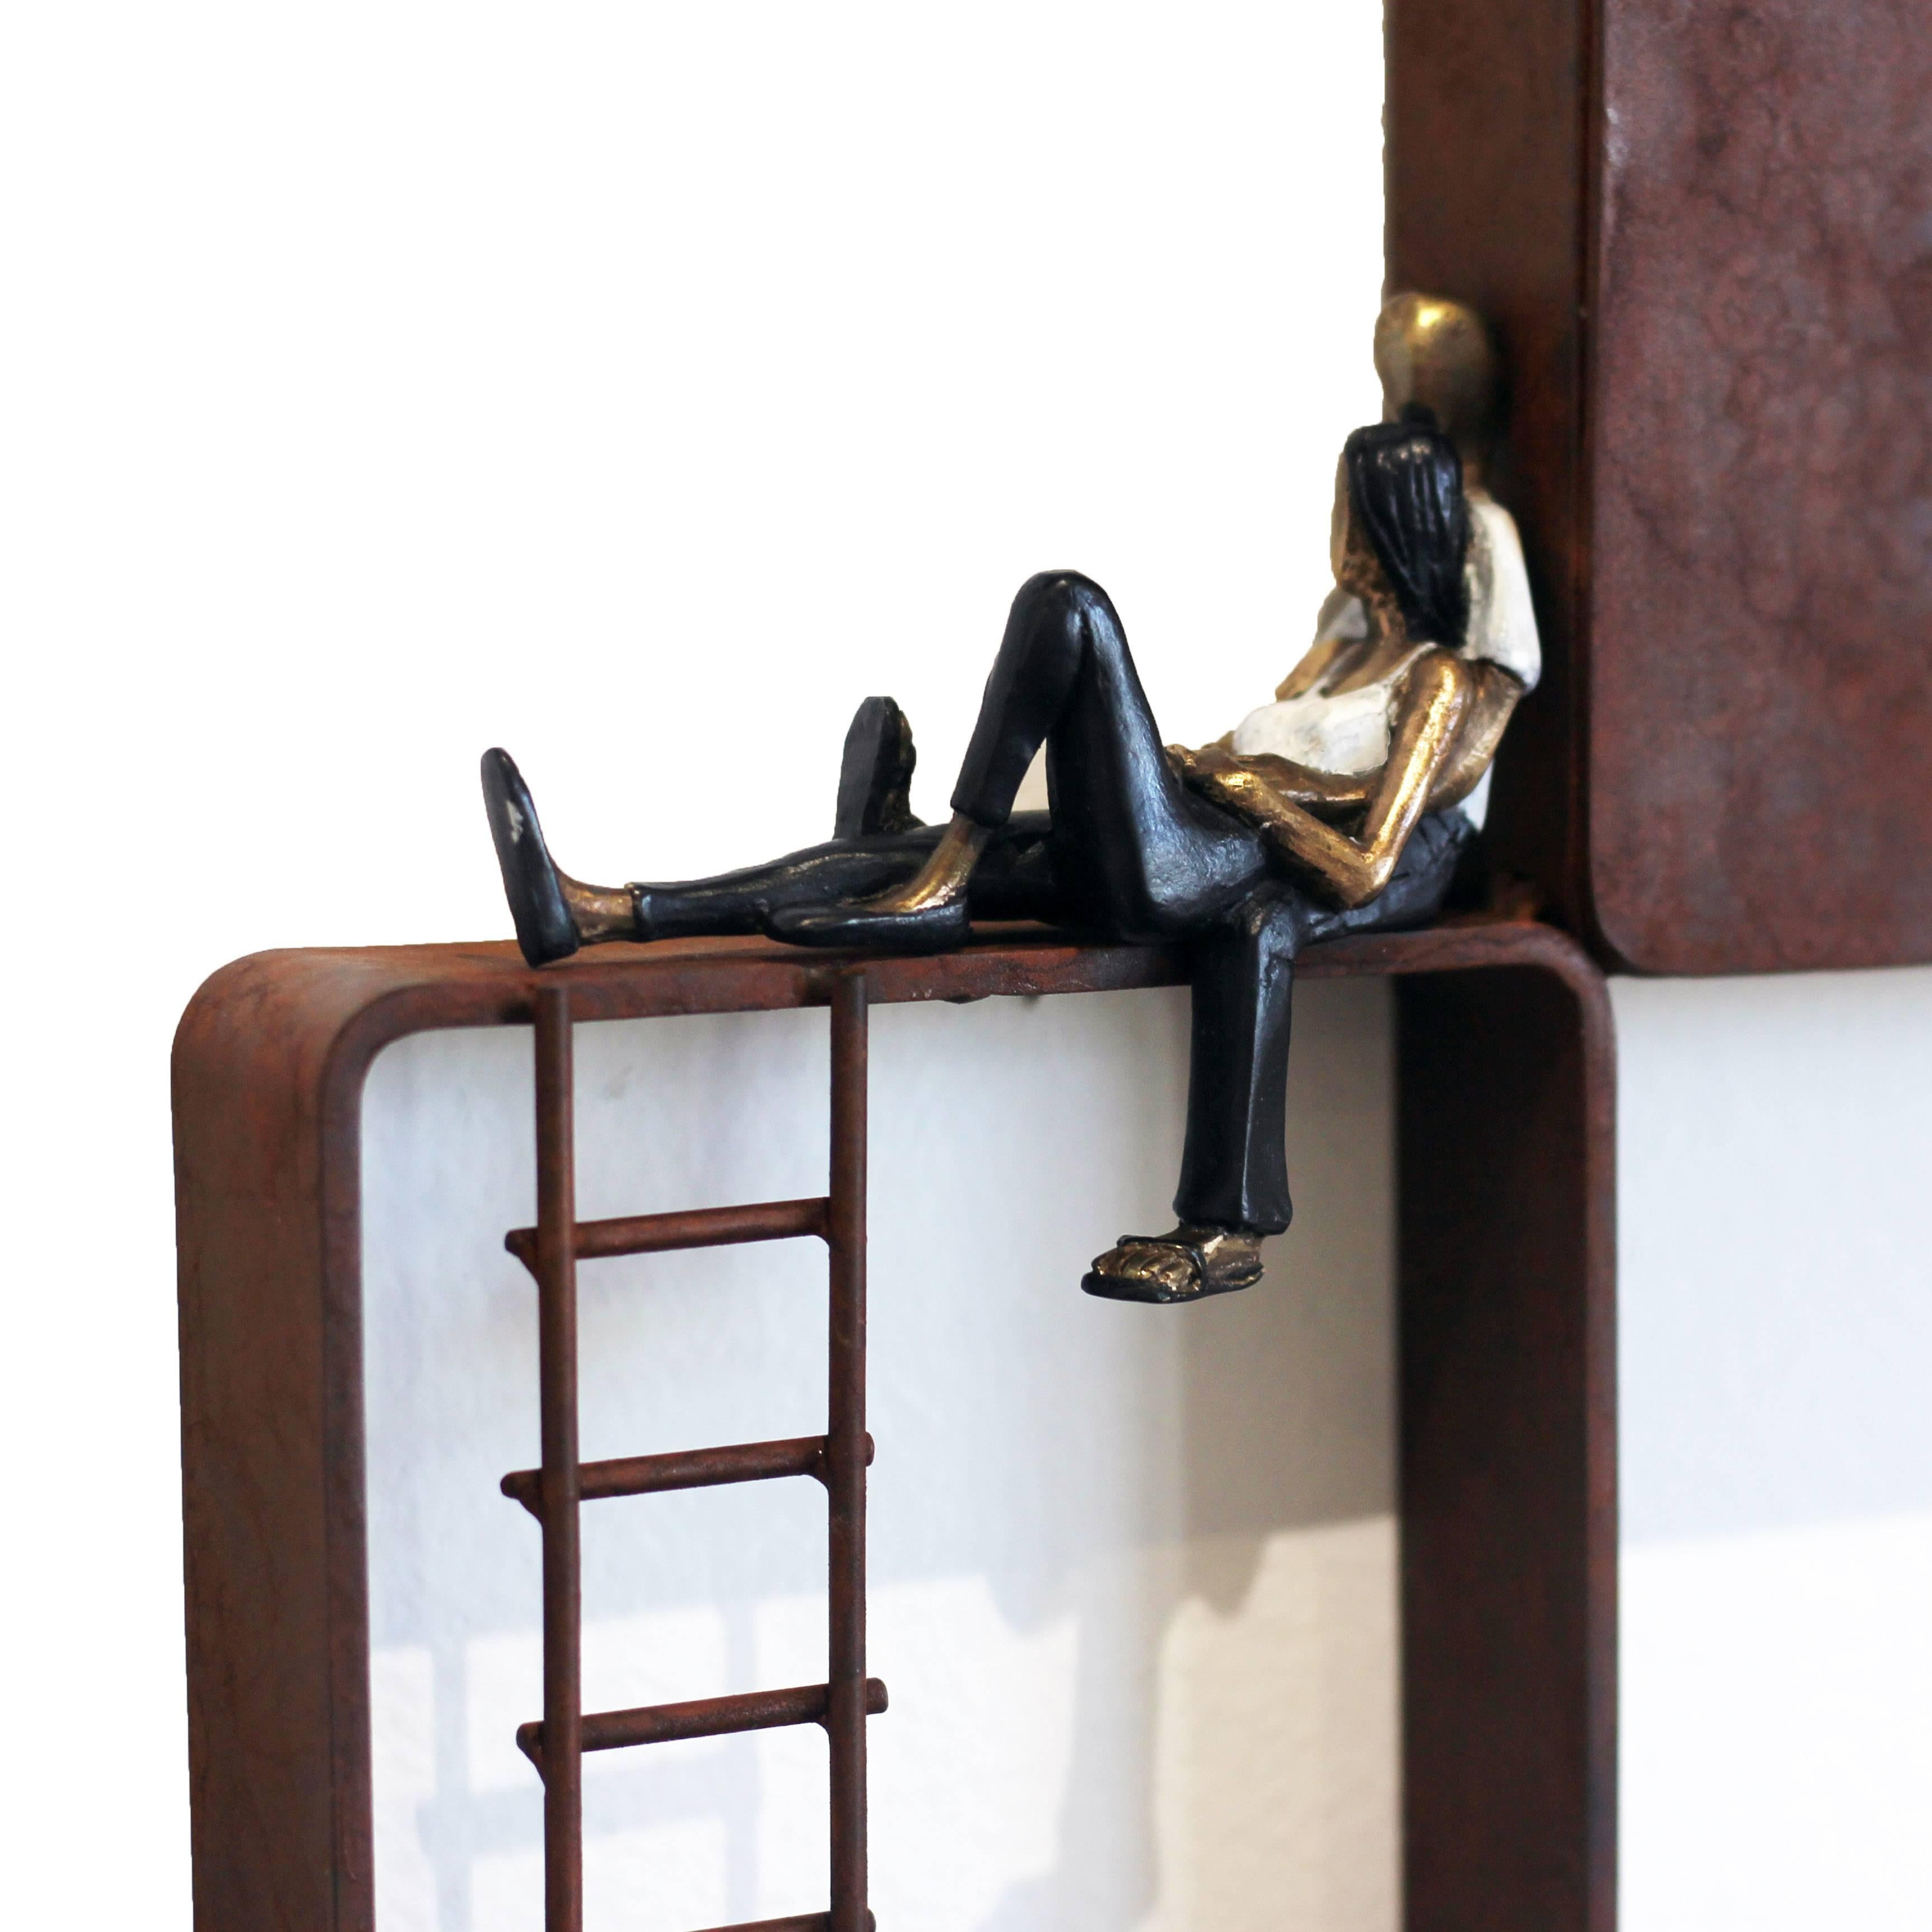 Just The Two of Us  - Contemporary Sculpture by Mireia Serra